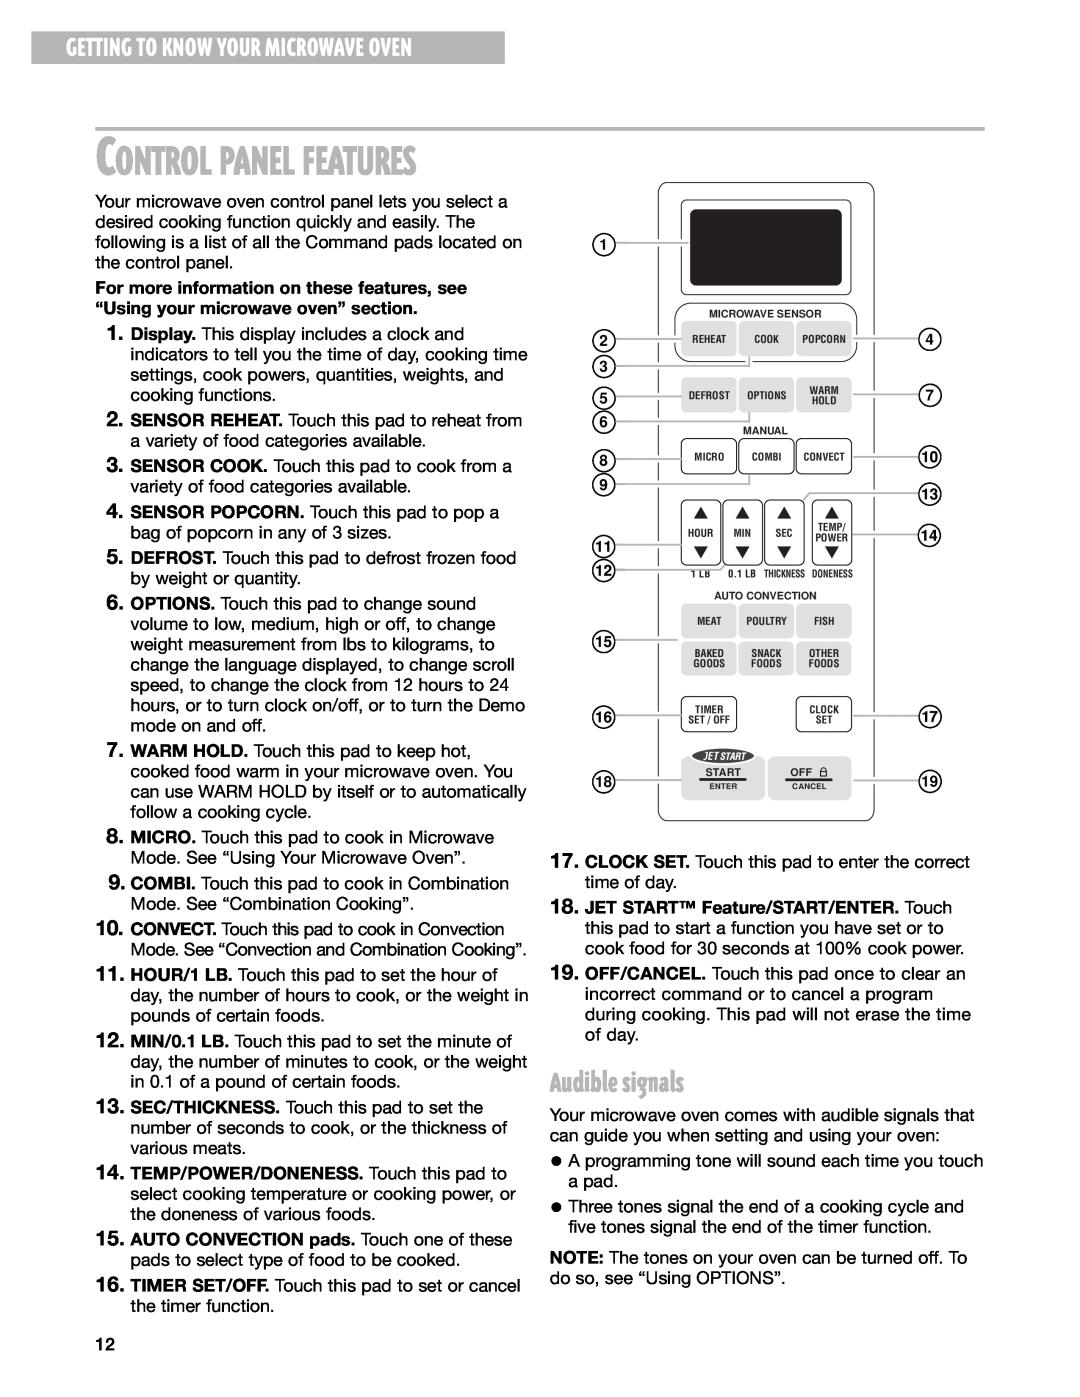 Whirlpool GM8155XJ installation instructions Audible signals, Control Panel Features, Getting To Know Your Microwave Oven 